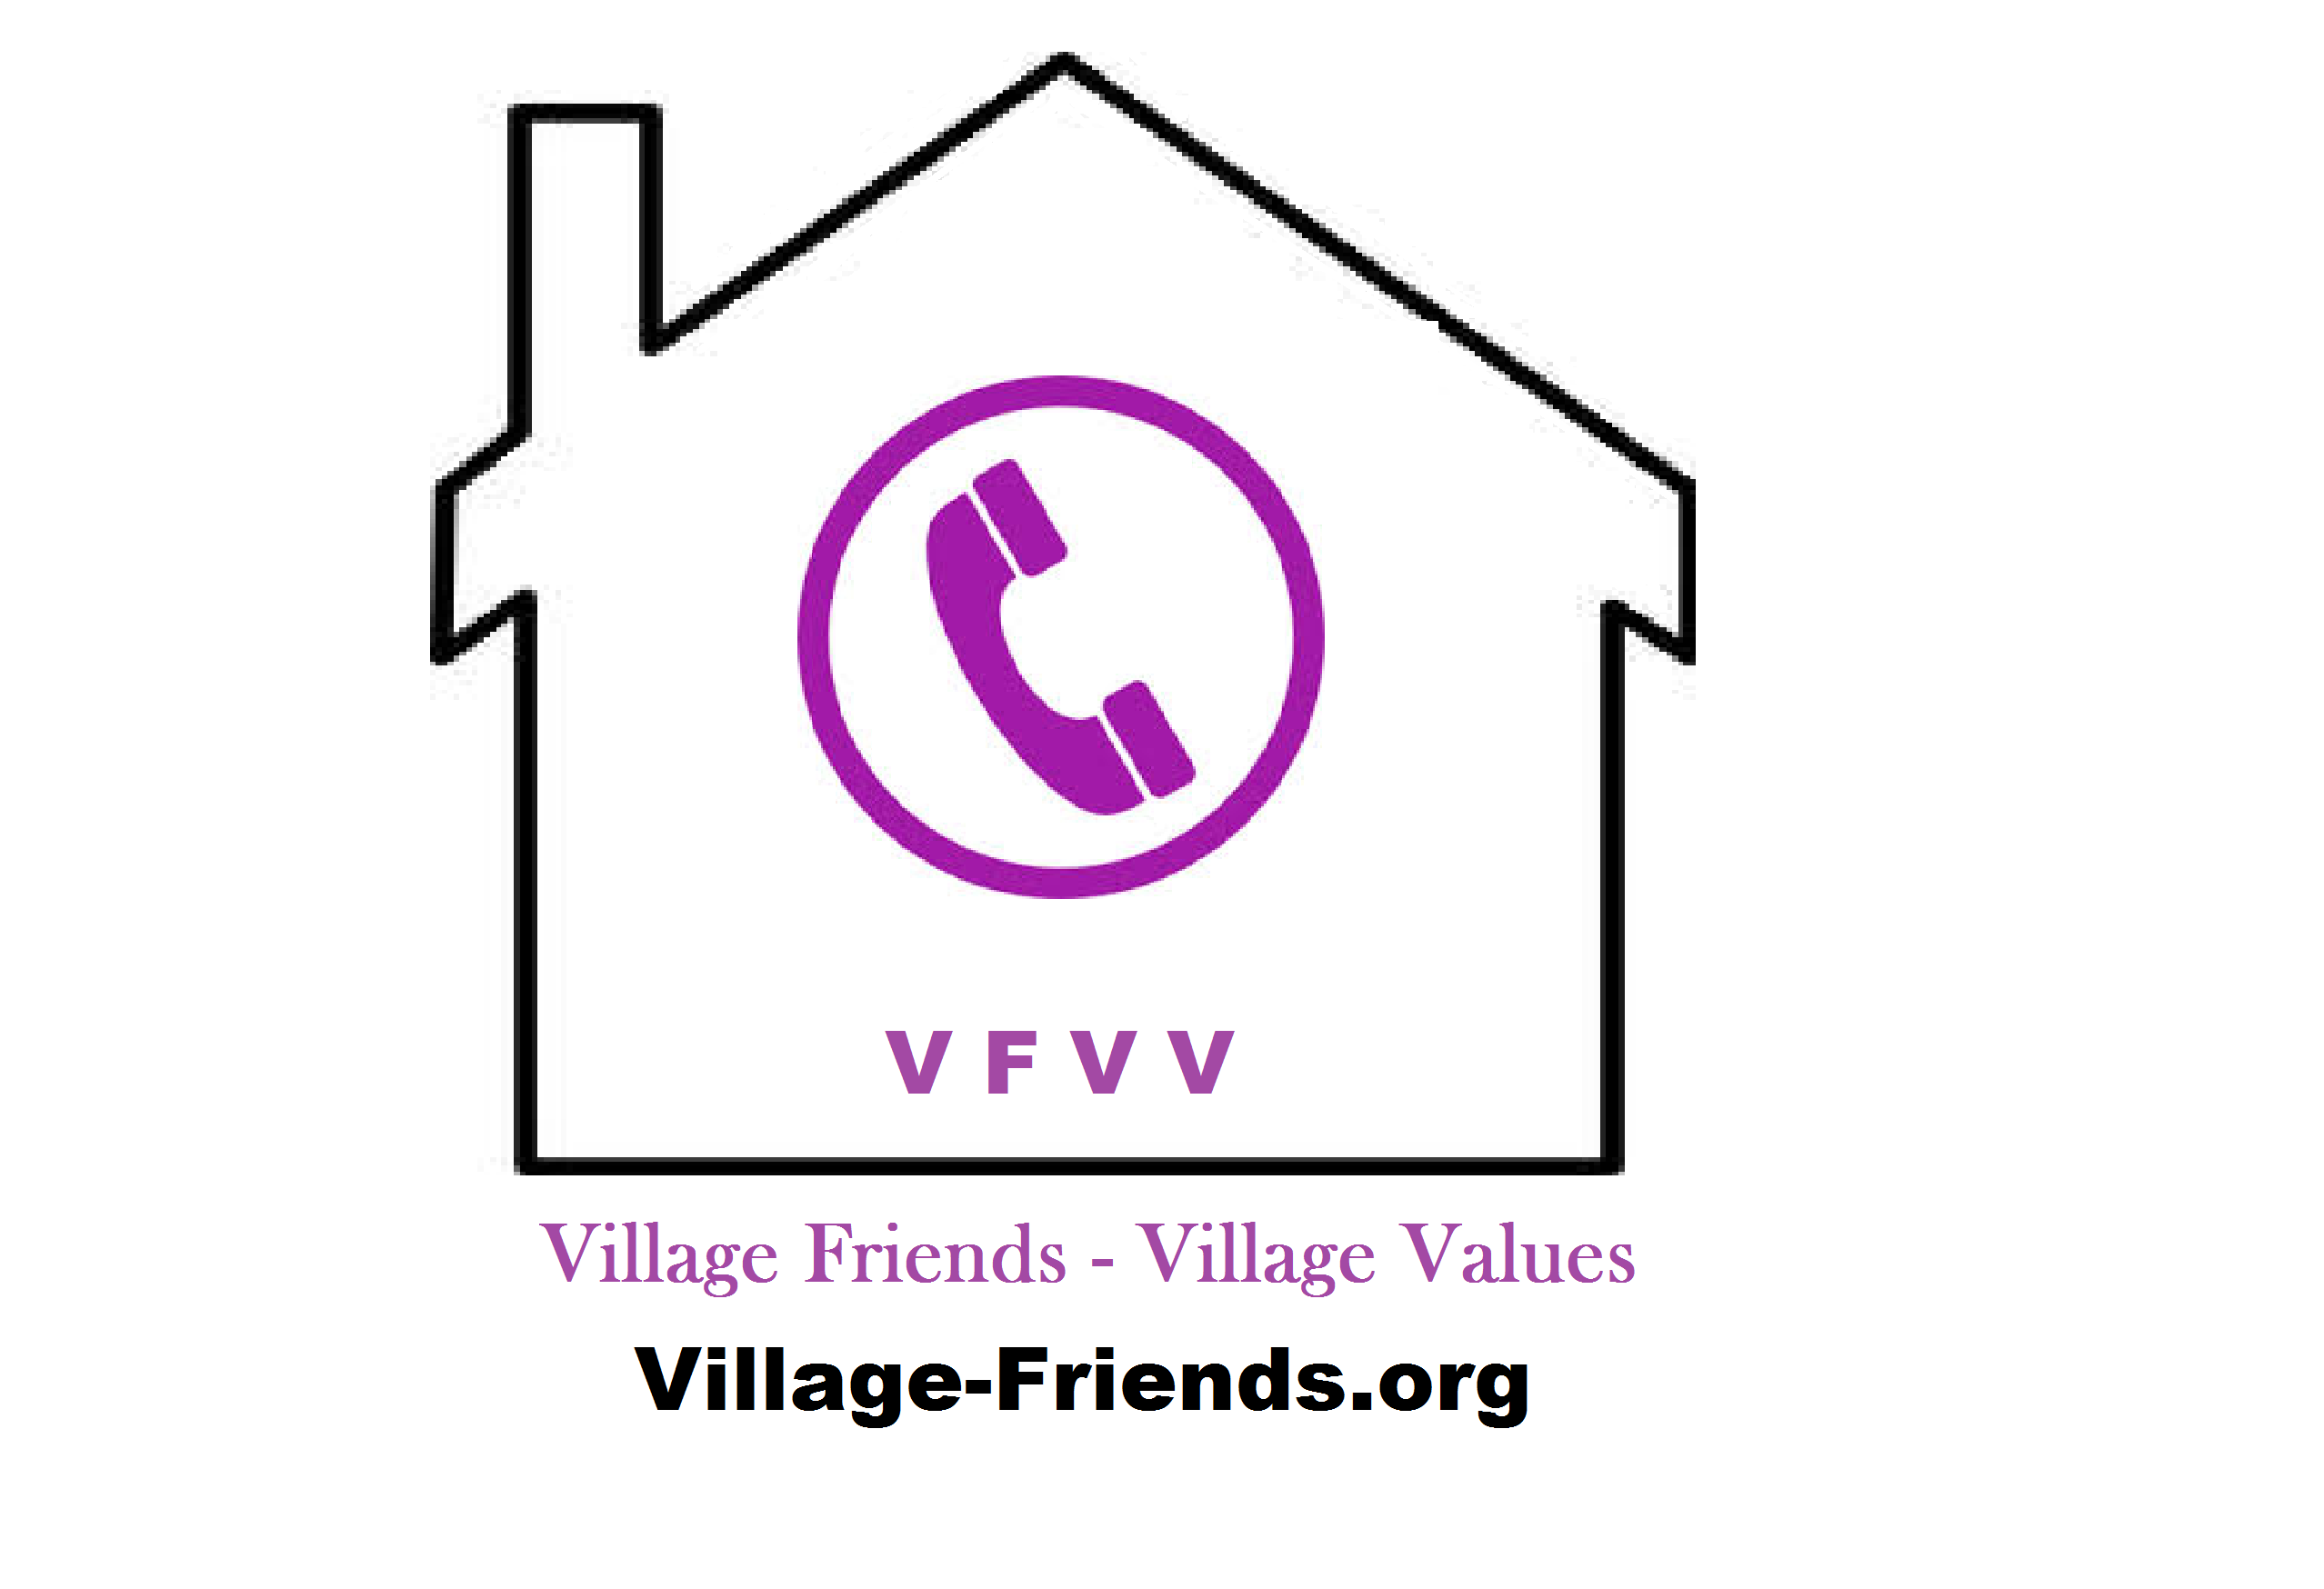 Older Americans; Village Values helps them grow old at home